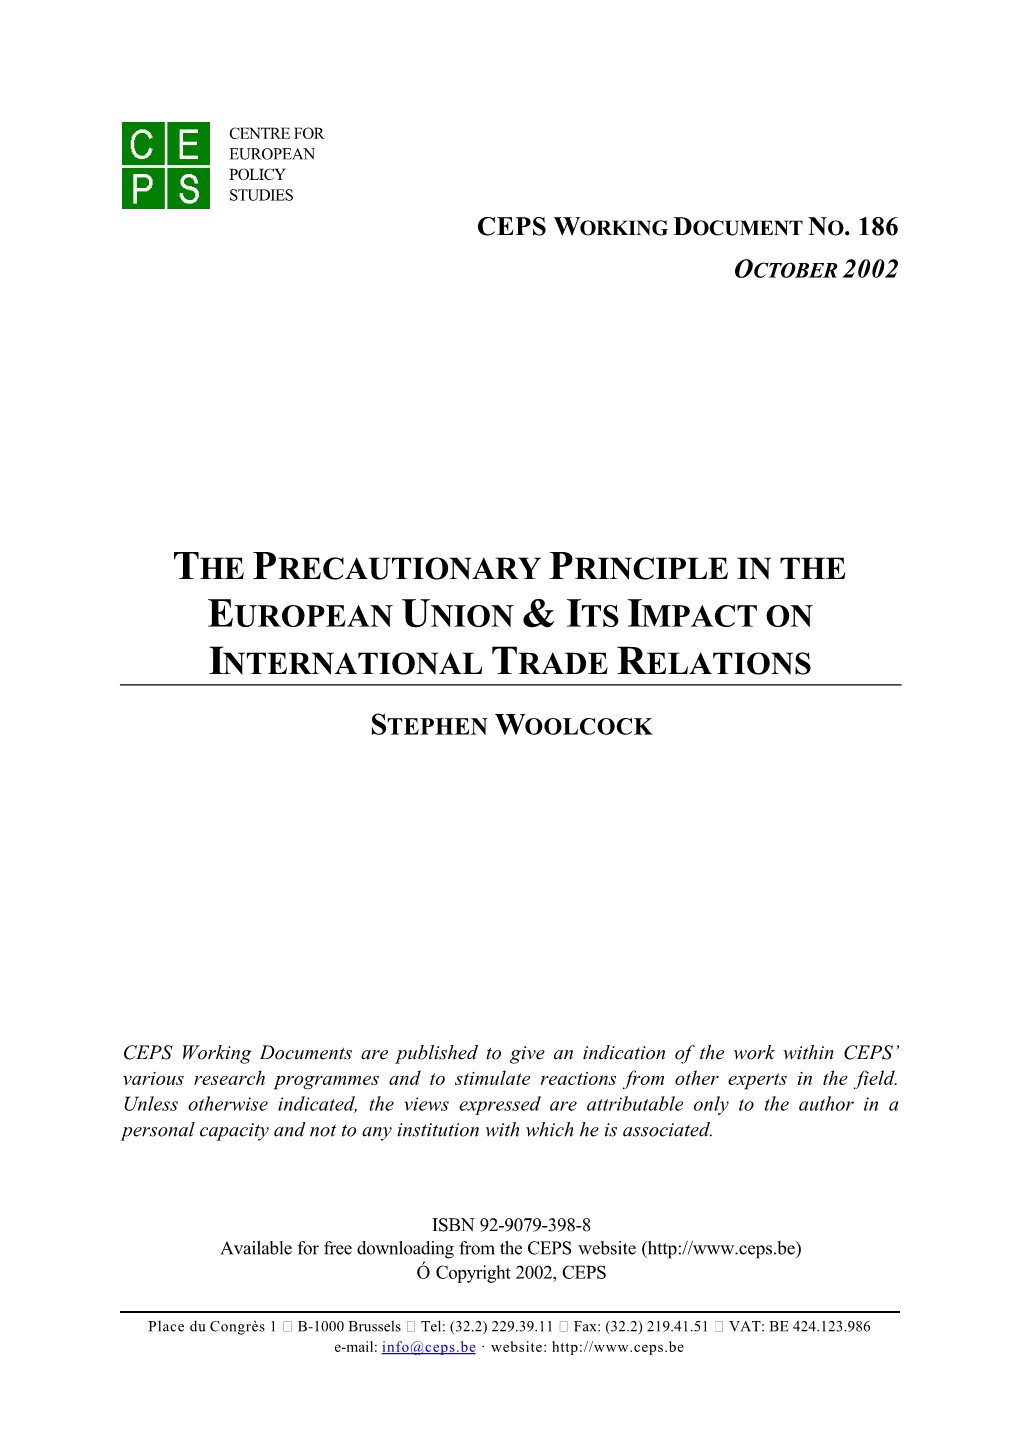 He Precautionary Principle in the European Union and Its Impact on International Trade Relations Stephen Woolcock